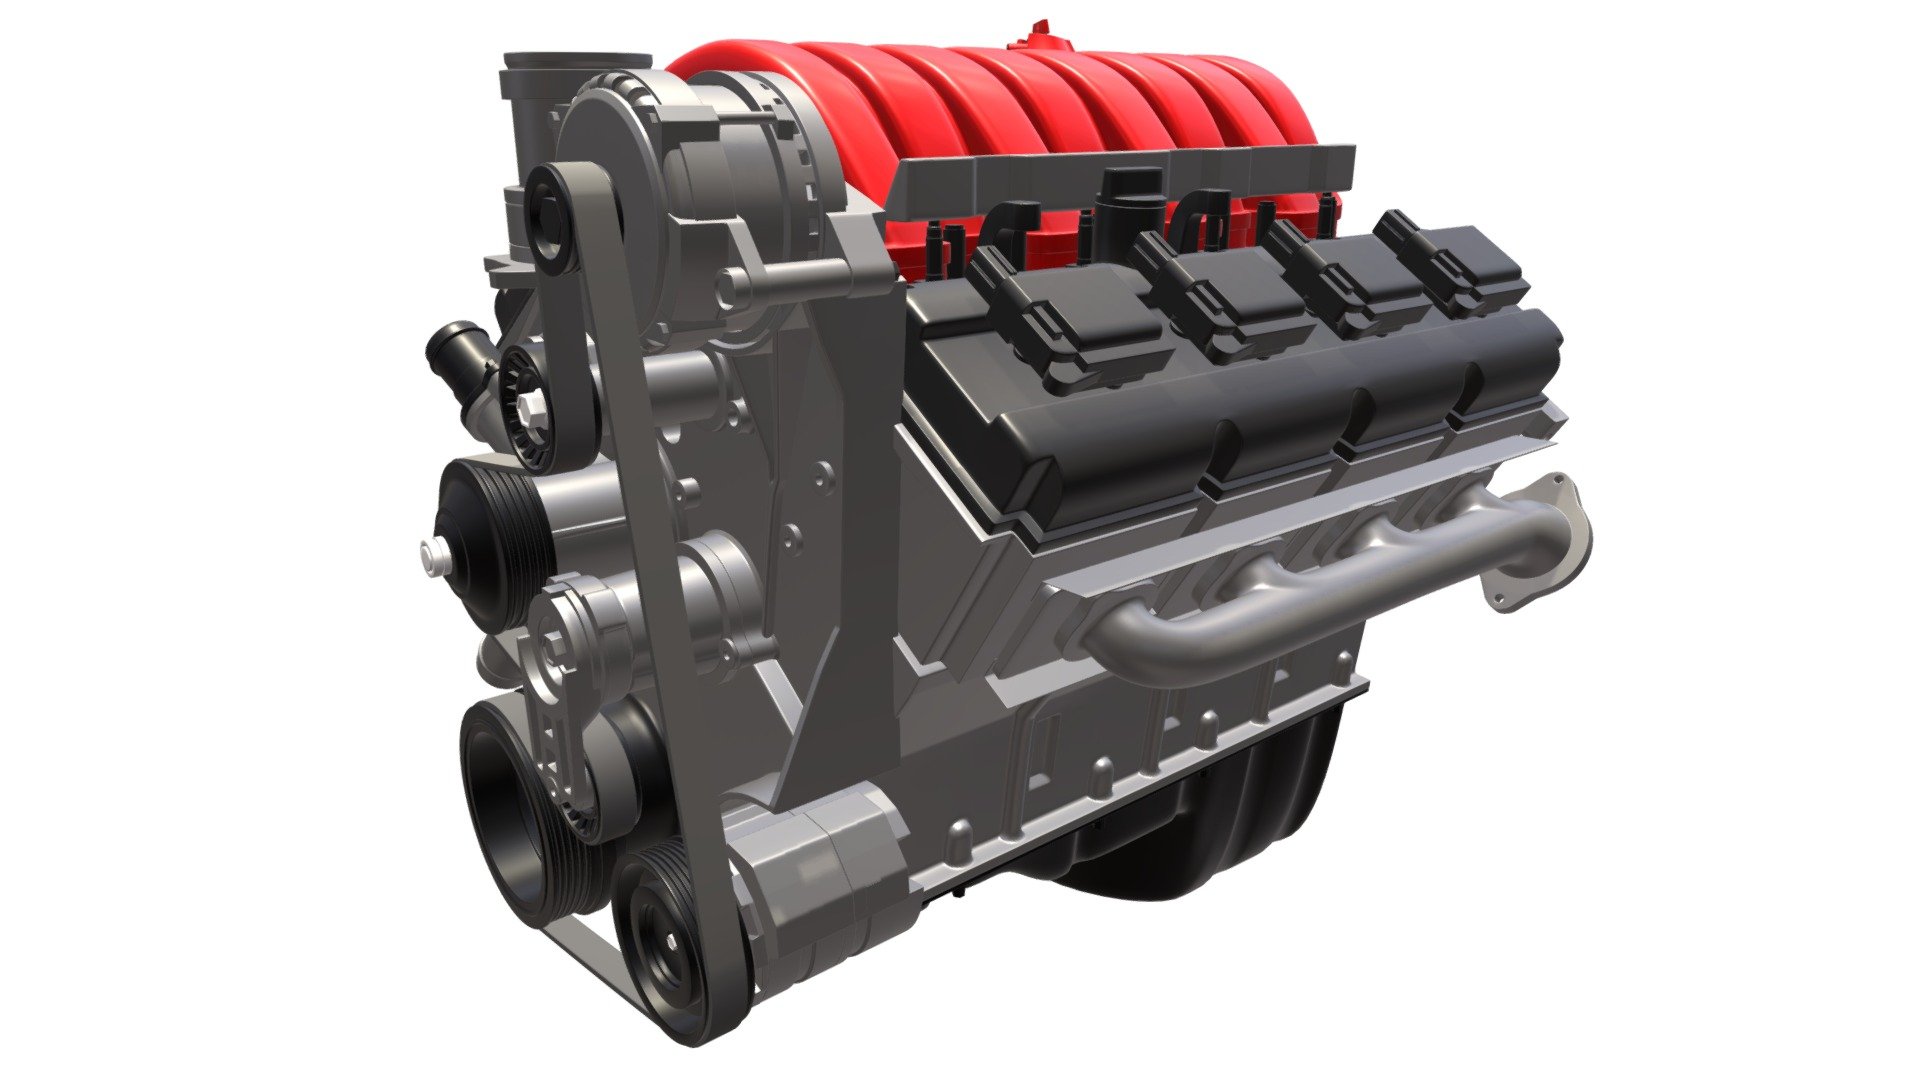 High quality 3d model of car engine.
No interior parts.
Colors can be easily modified.
If you need different file format, please contact me 3d model